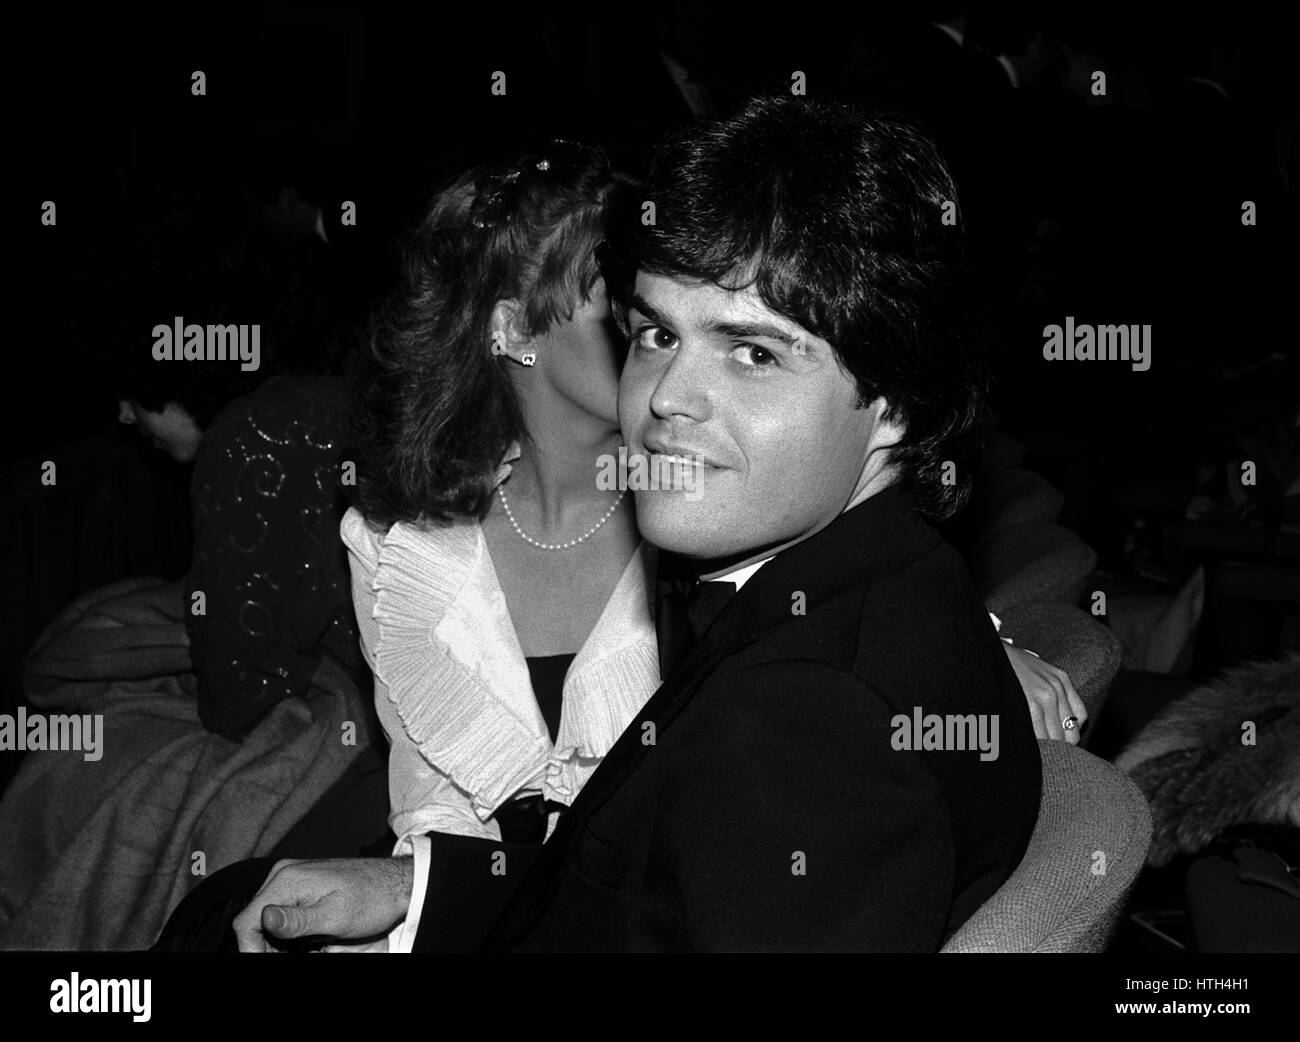 Donny Osmond attending the Opening Night Performance of thye new Broadway Hit Musical DREAMGIRLS at the Imperial Theatre in New York City December 20, 1981 Stock Photo